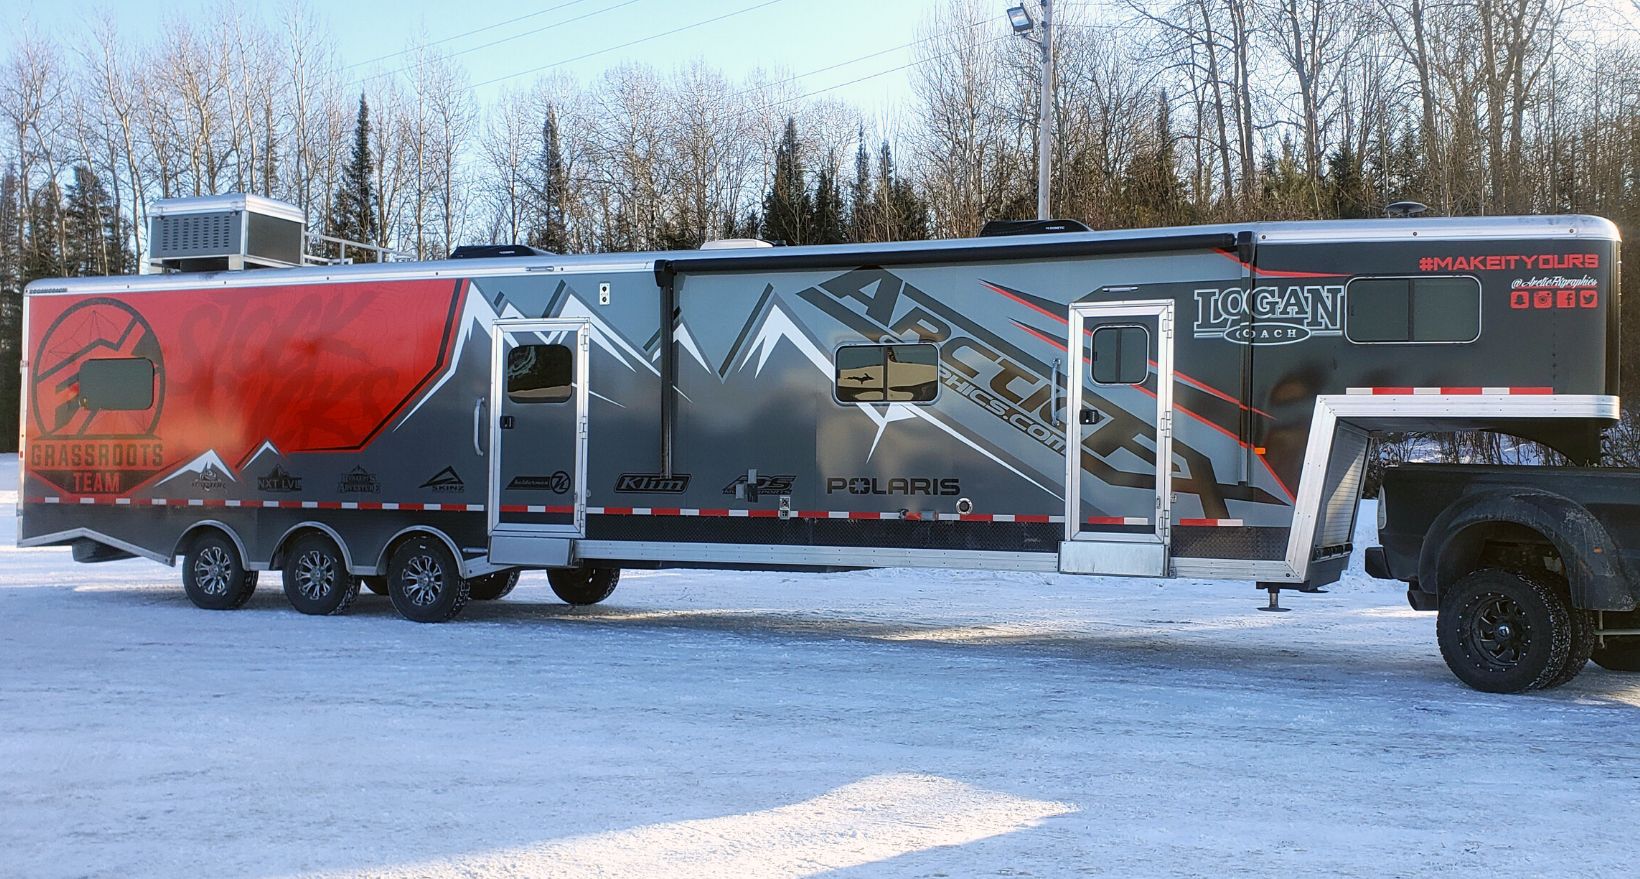 A snowmobile trailer with a custom vinyl wrap with red, black, and gray mountains and shapes.